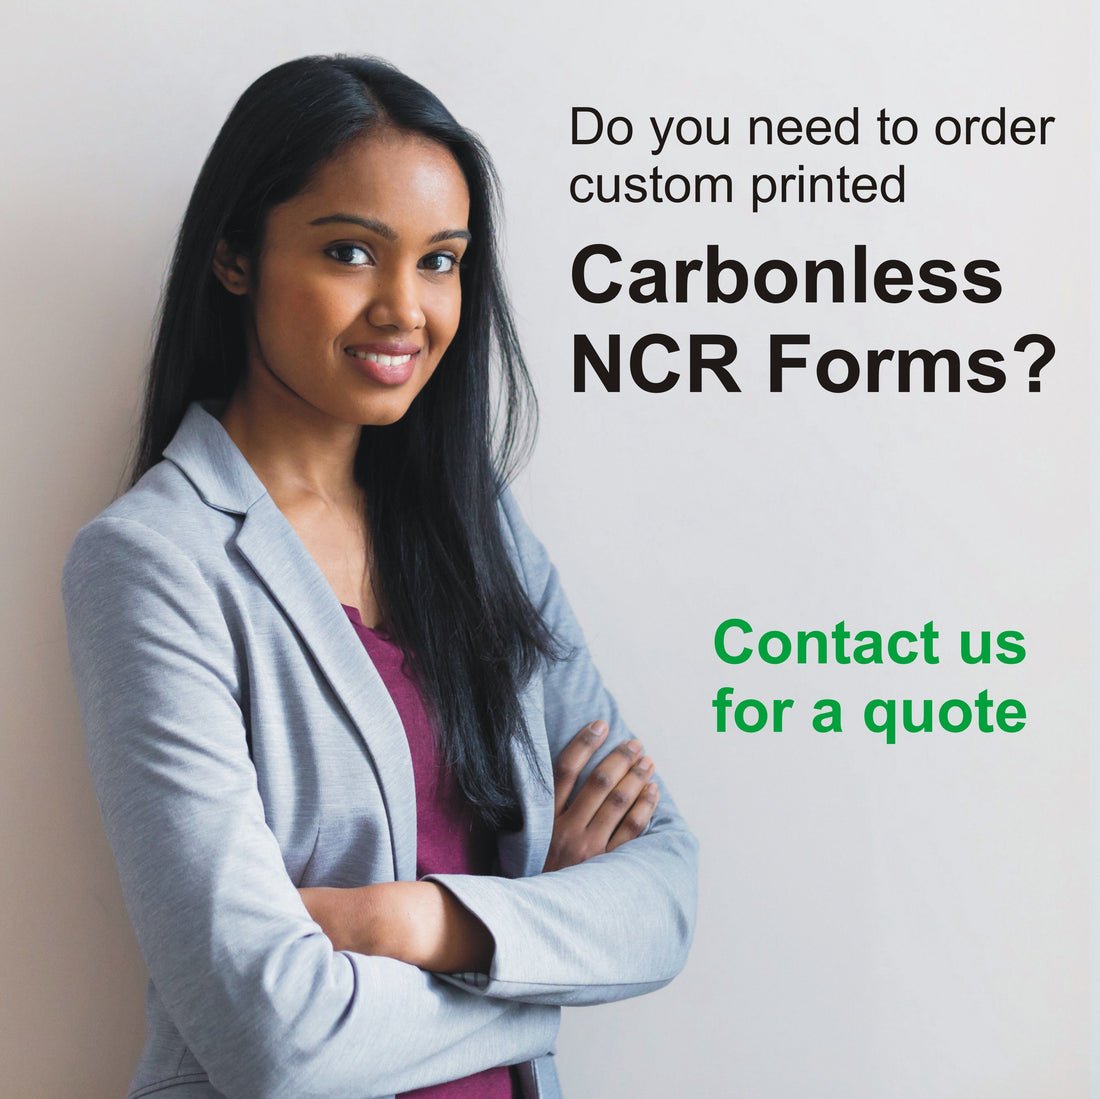 NCR Carbonless Printing - What Can NCR Forms Be Used For?